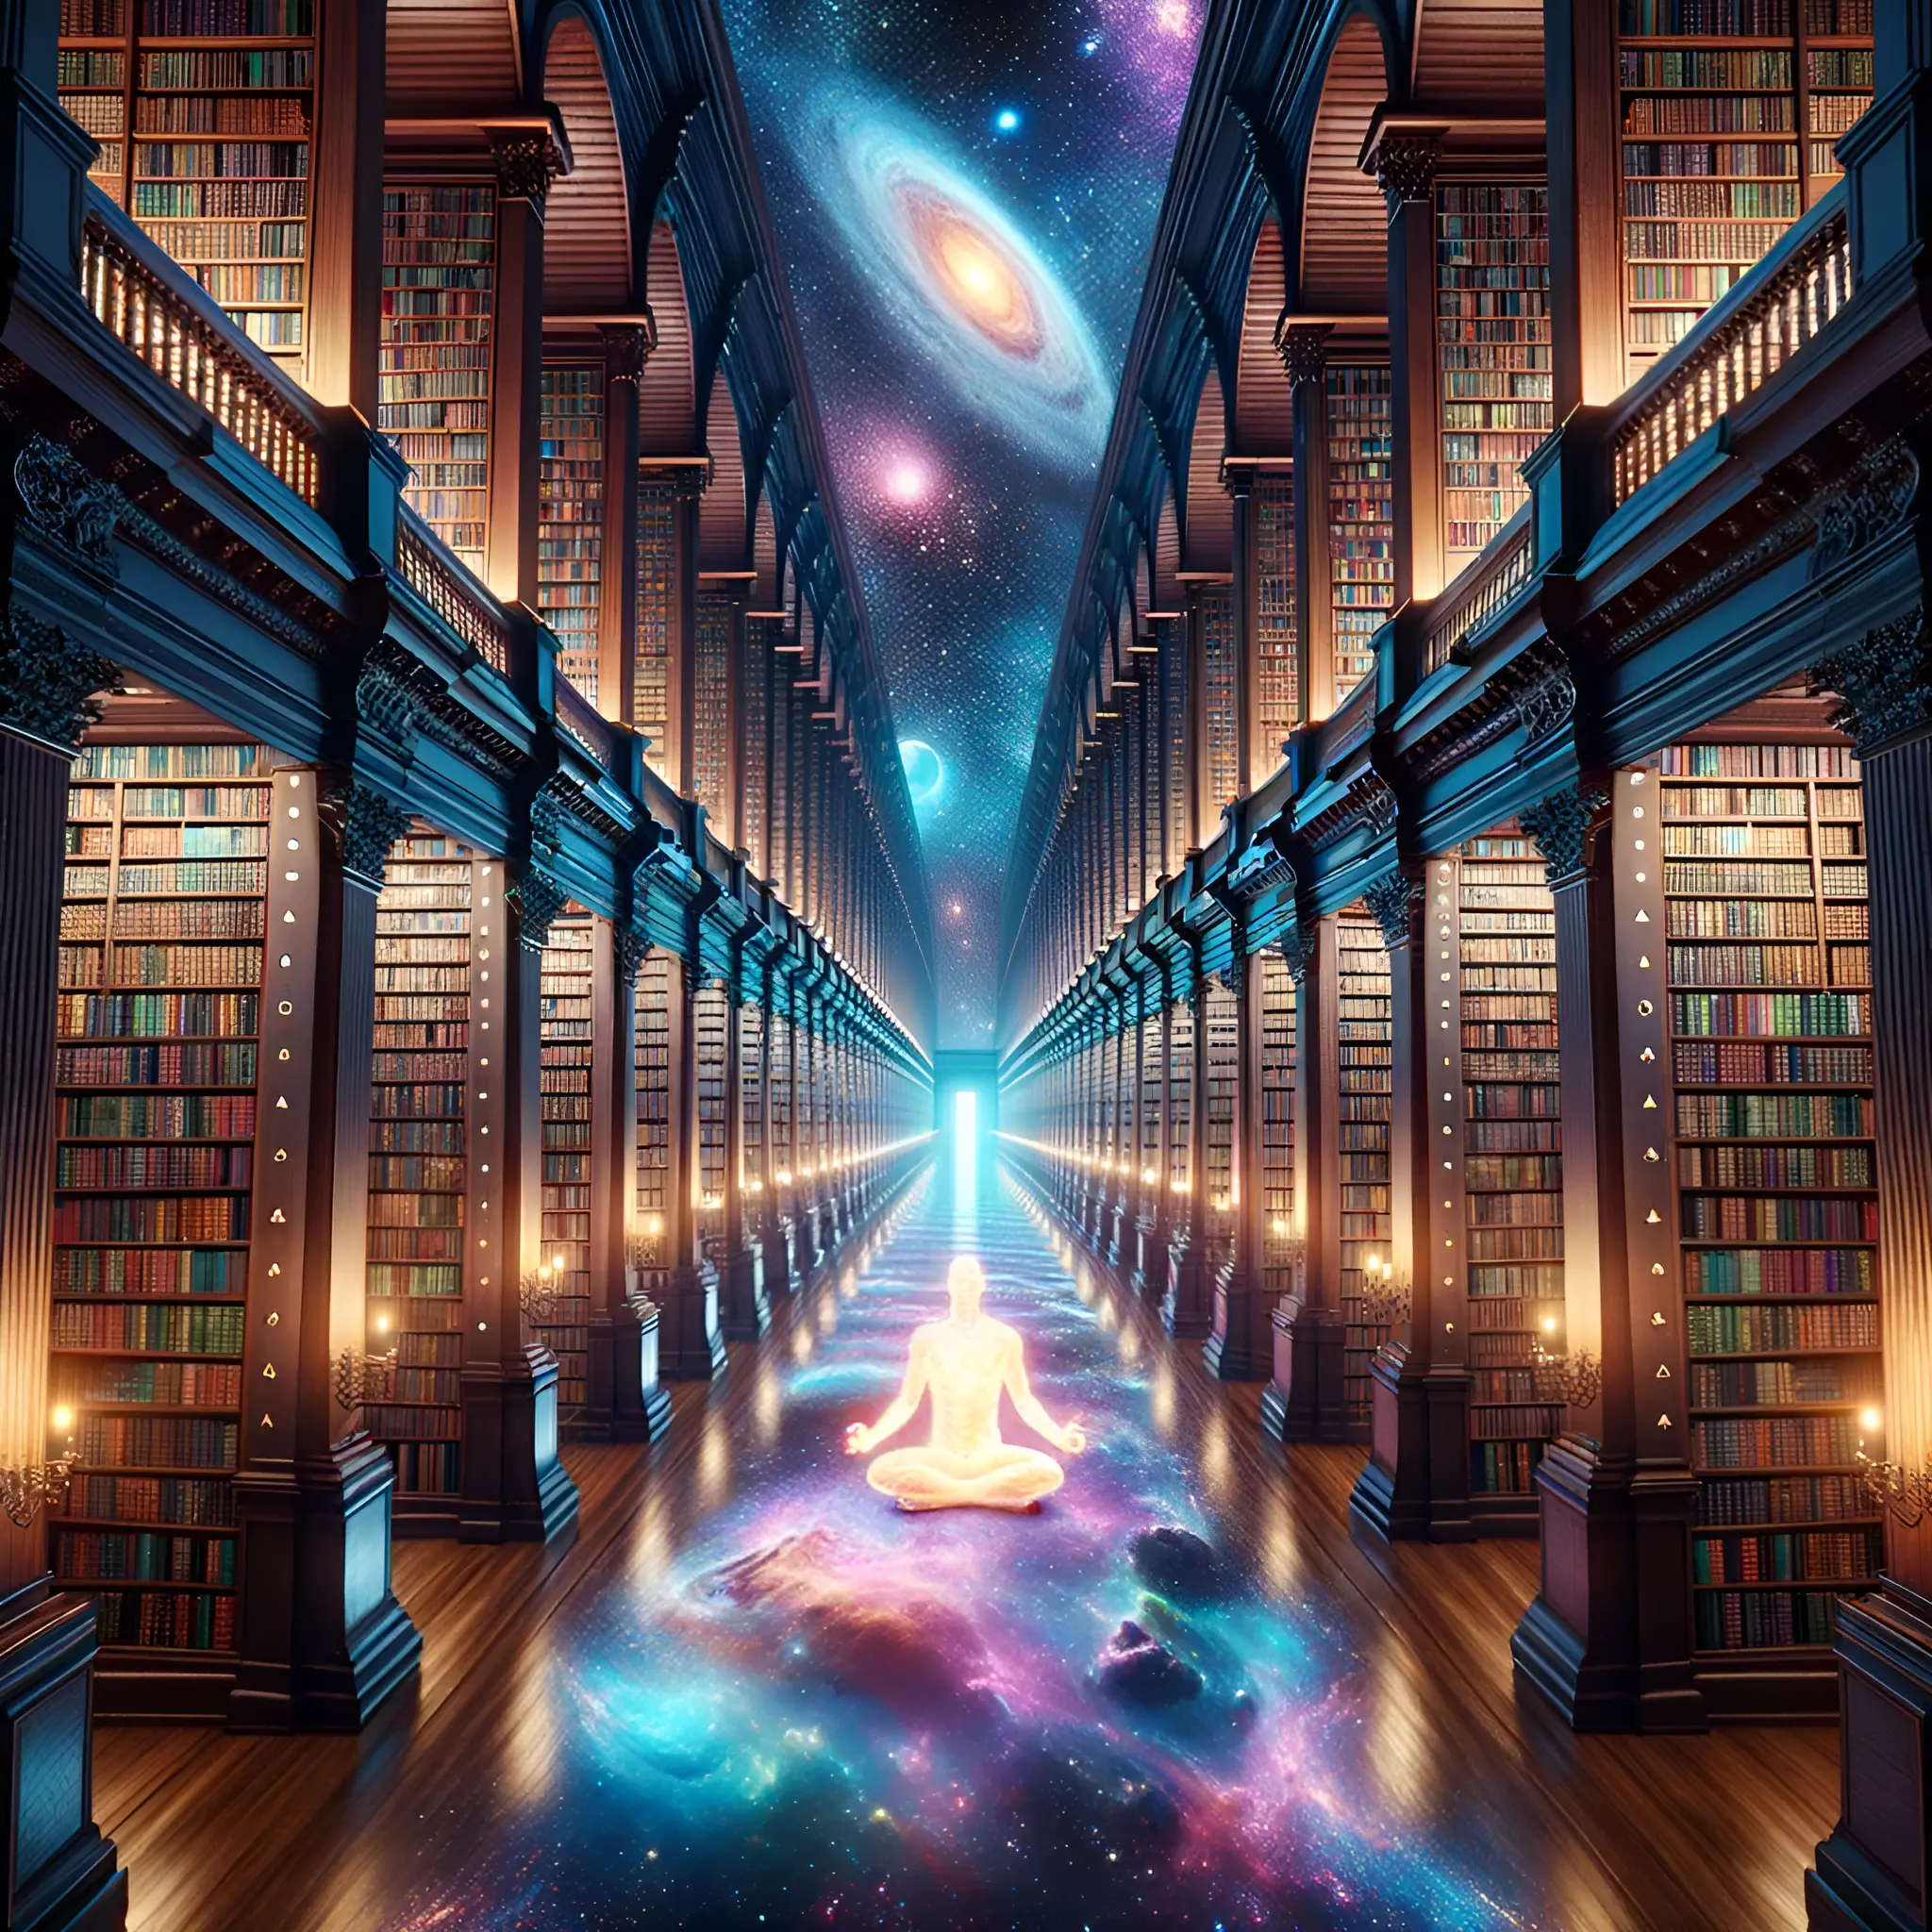 Artistic image of a human silhouette sitting in a grand library representing the Akashic Records